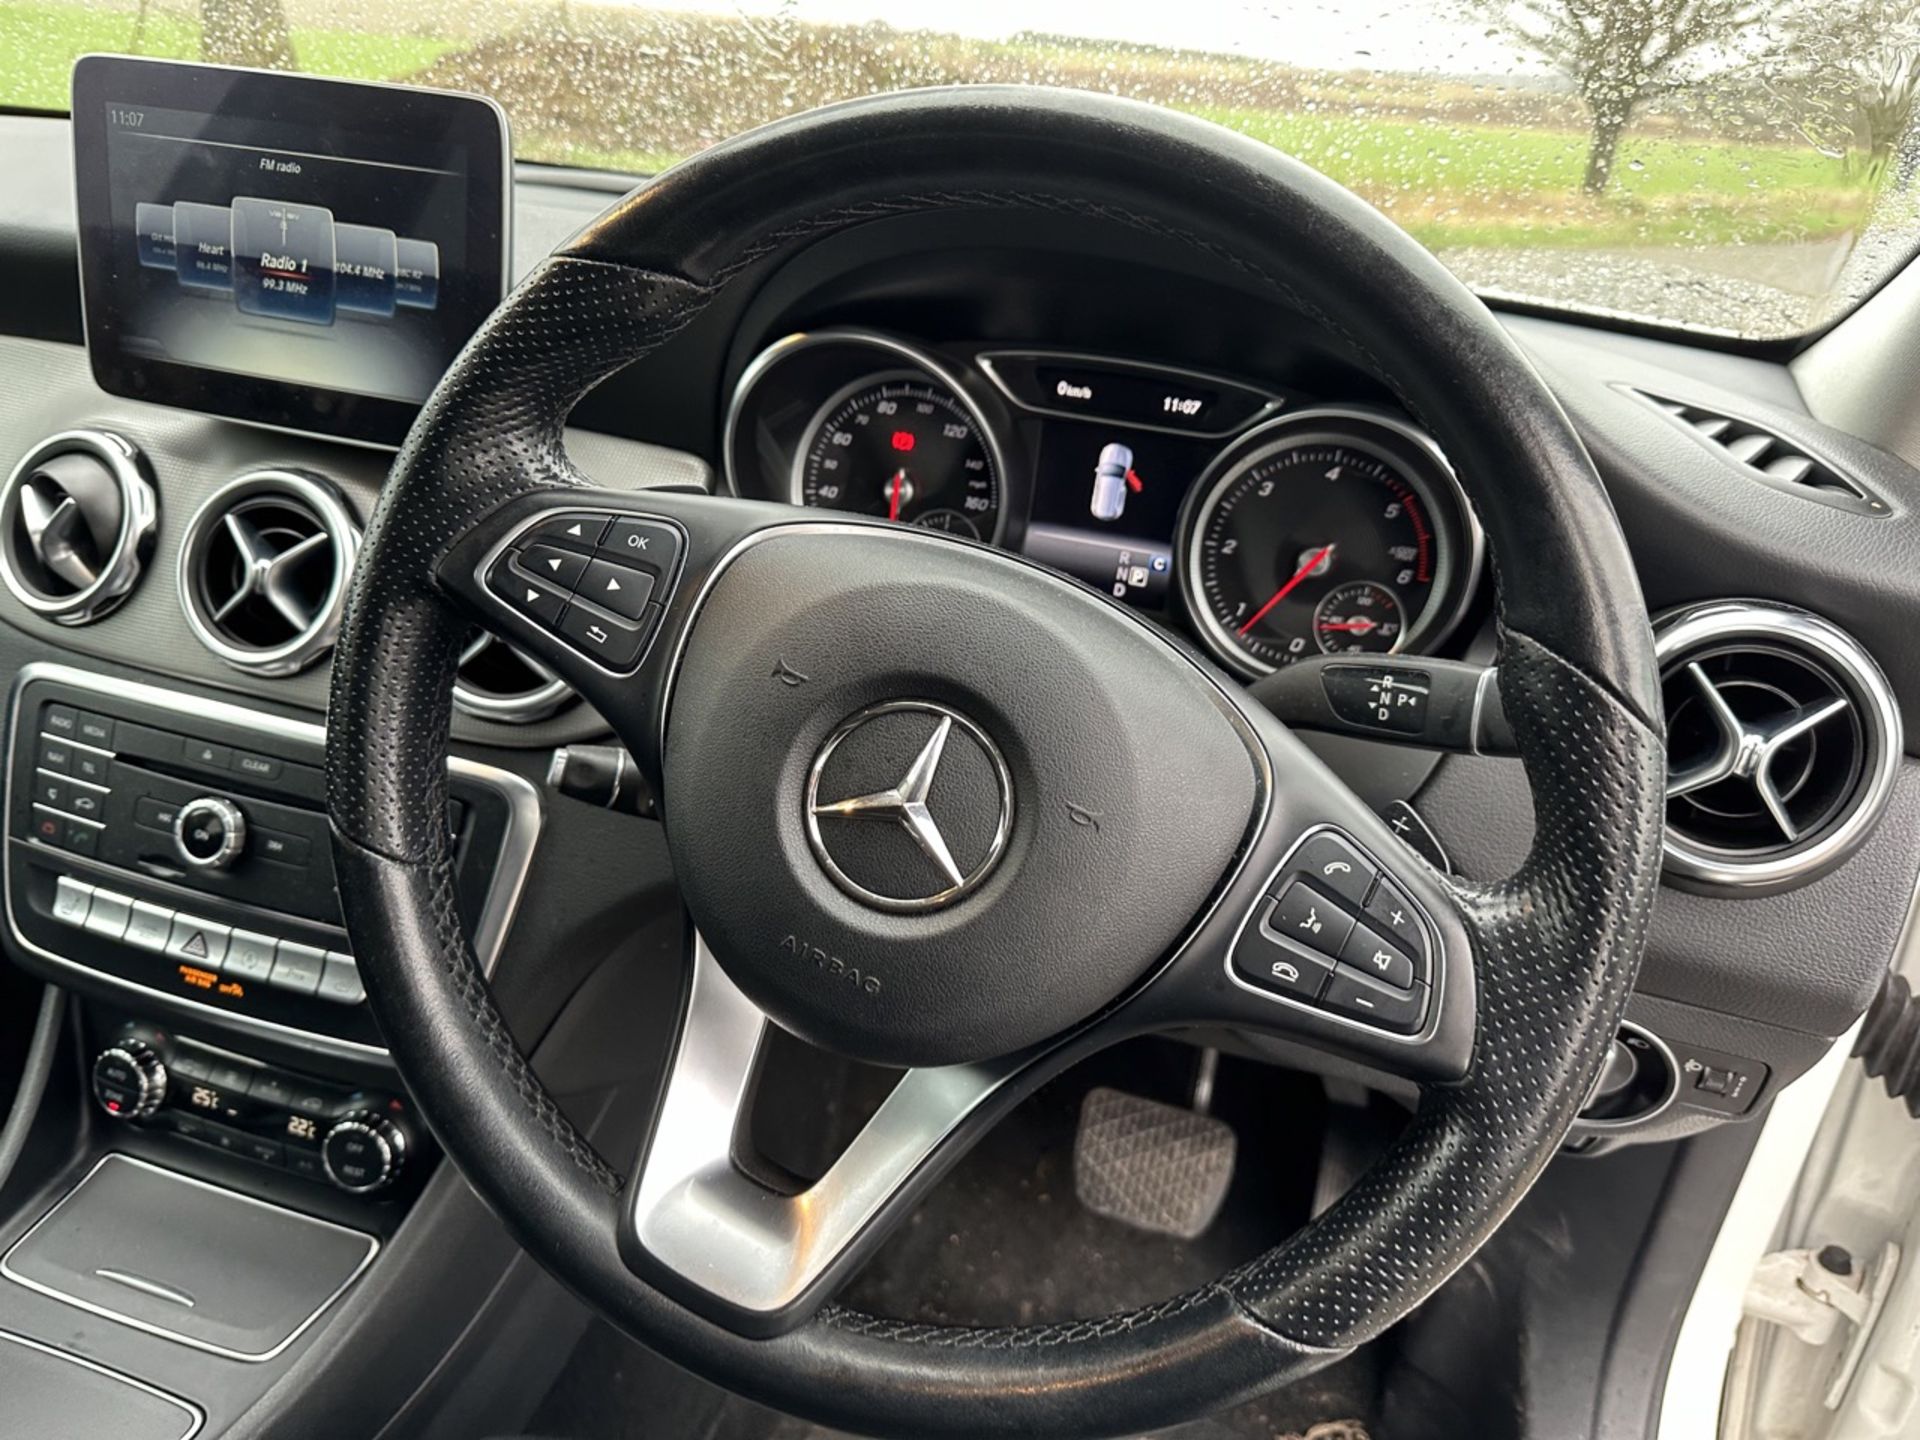 MERCEDES-BENZ GLA 200d “Automatic” Sport Executive 5dr - (2019 Model) *HIGH SPEC* 79k Miles Only - Image 20 of 24